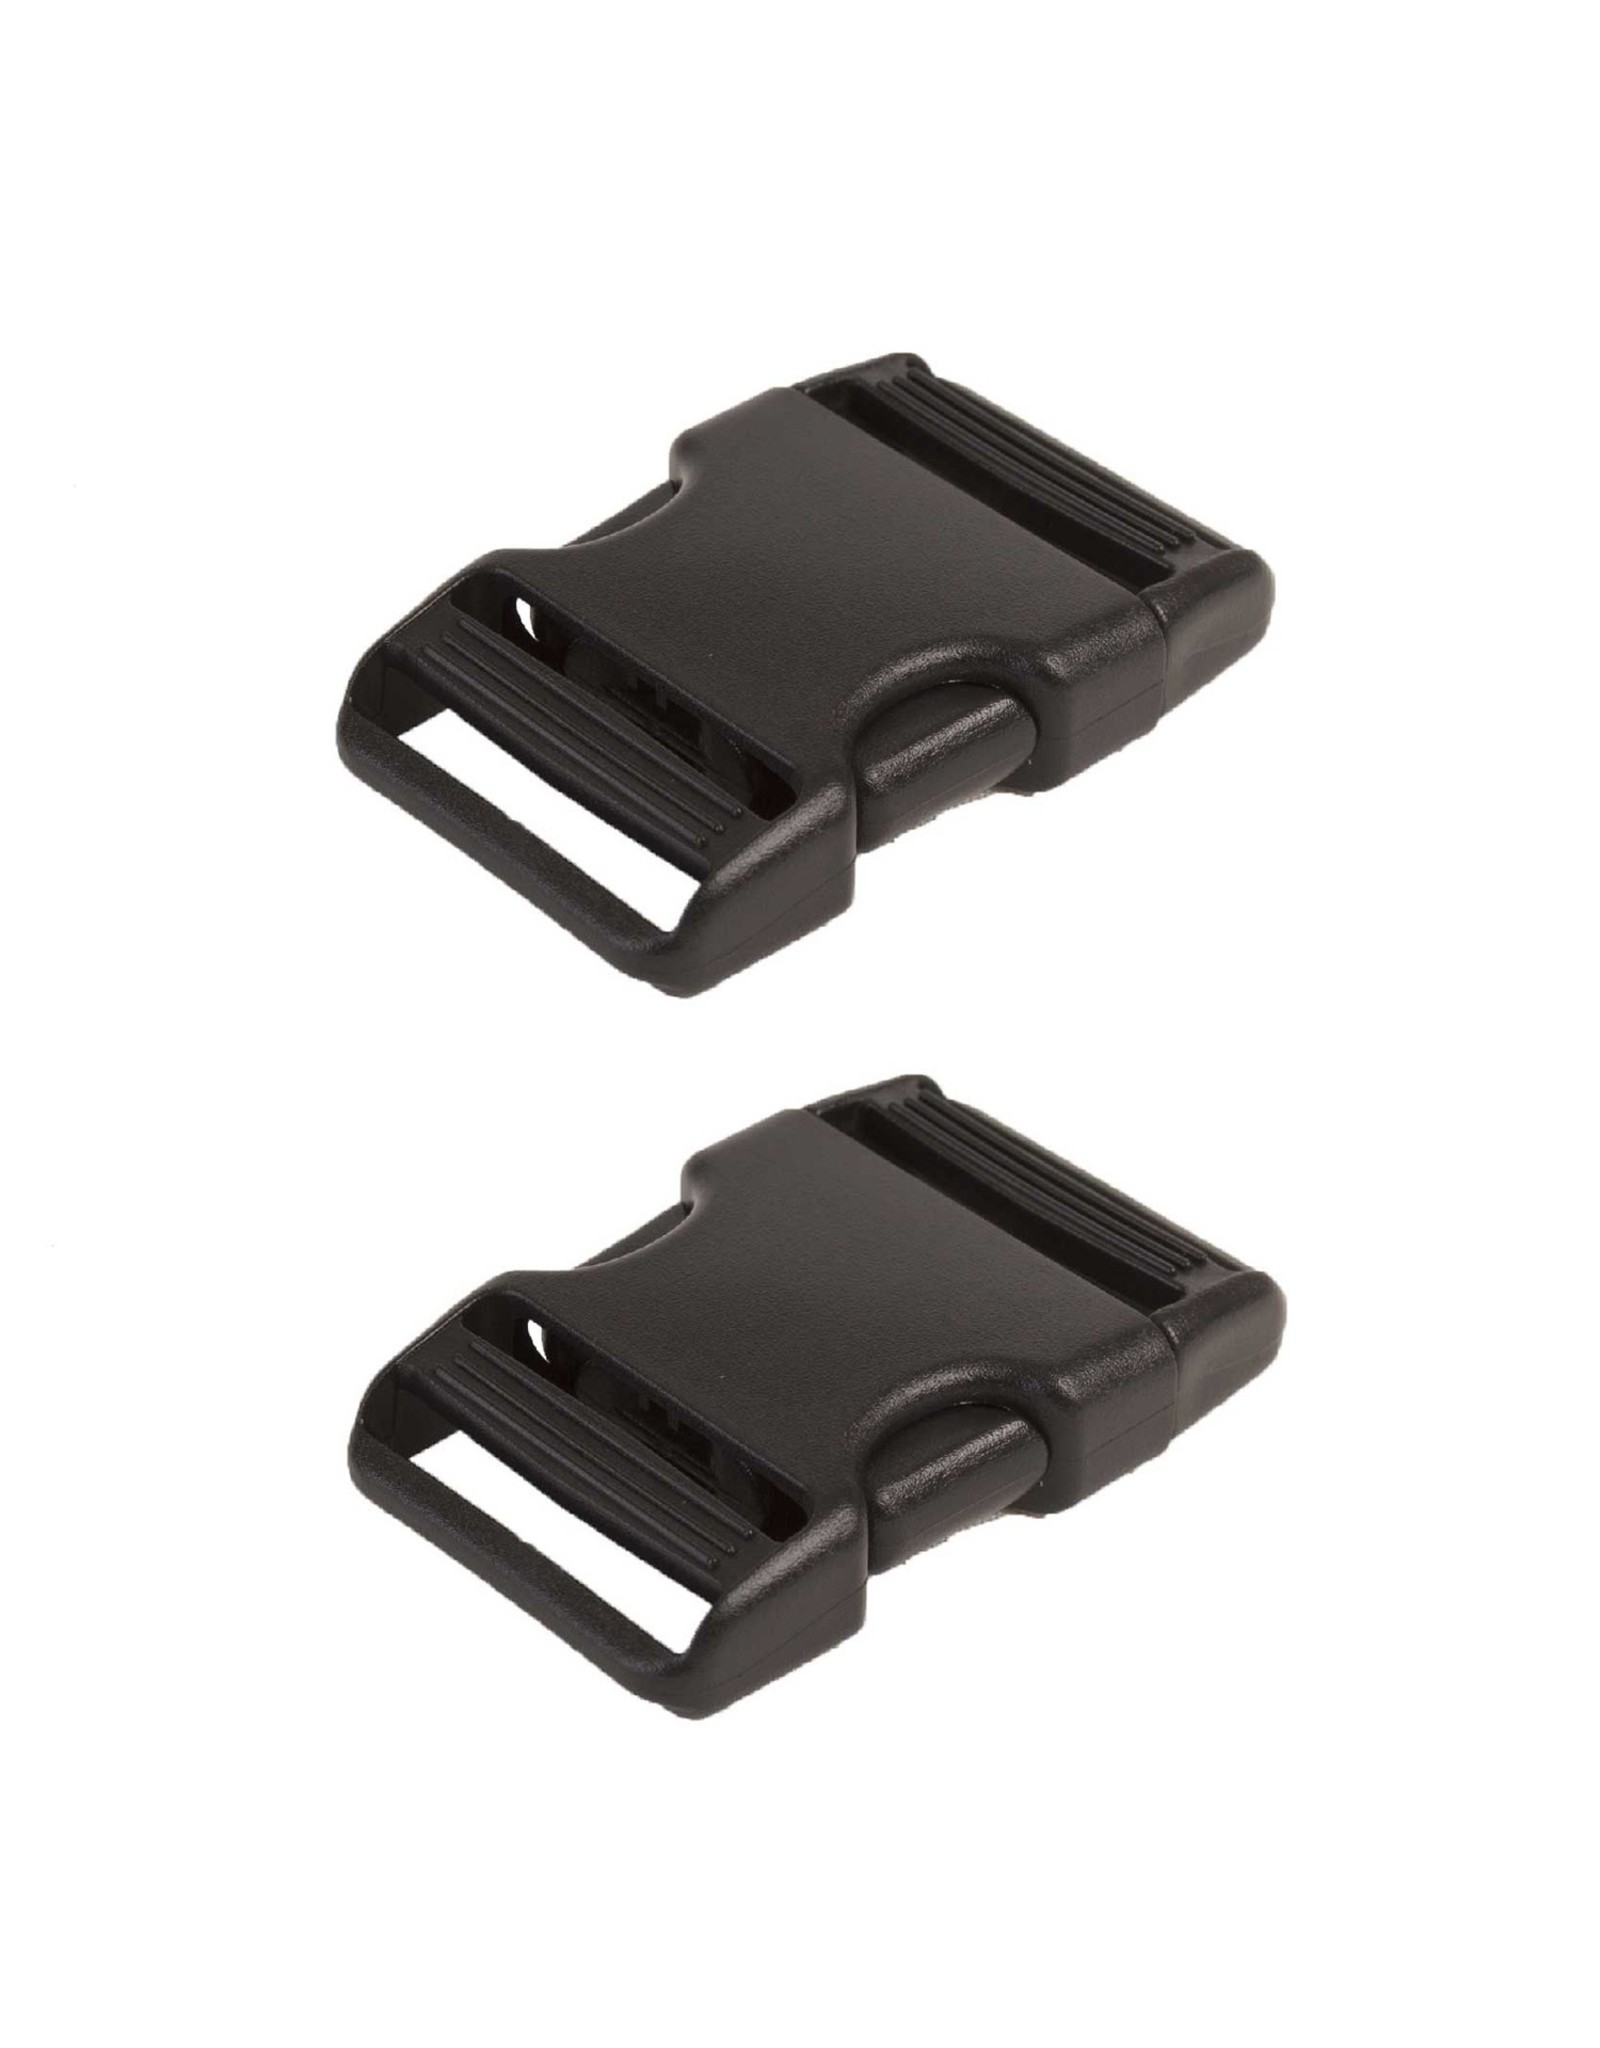 ByAnnie Side-Release Buckle - 1 inch - Black Plastic - 2 pieces